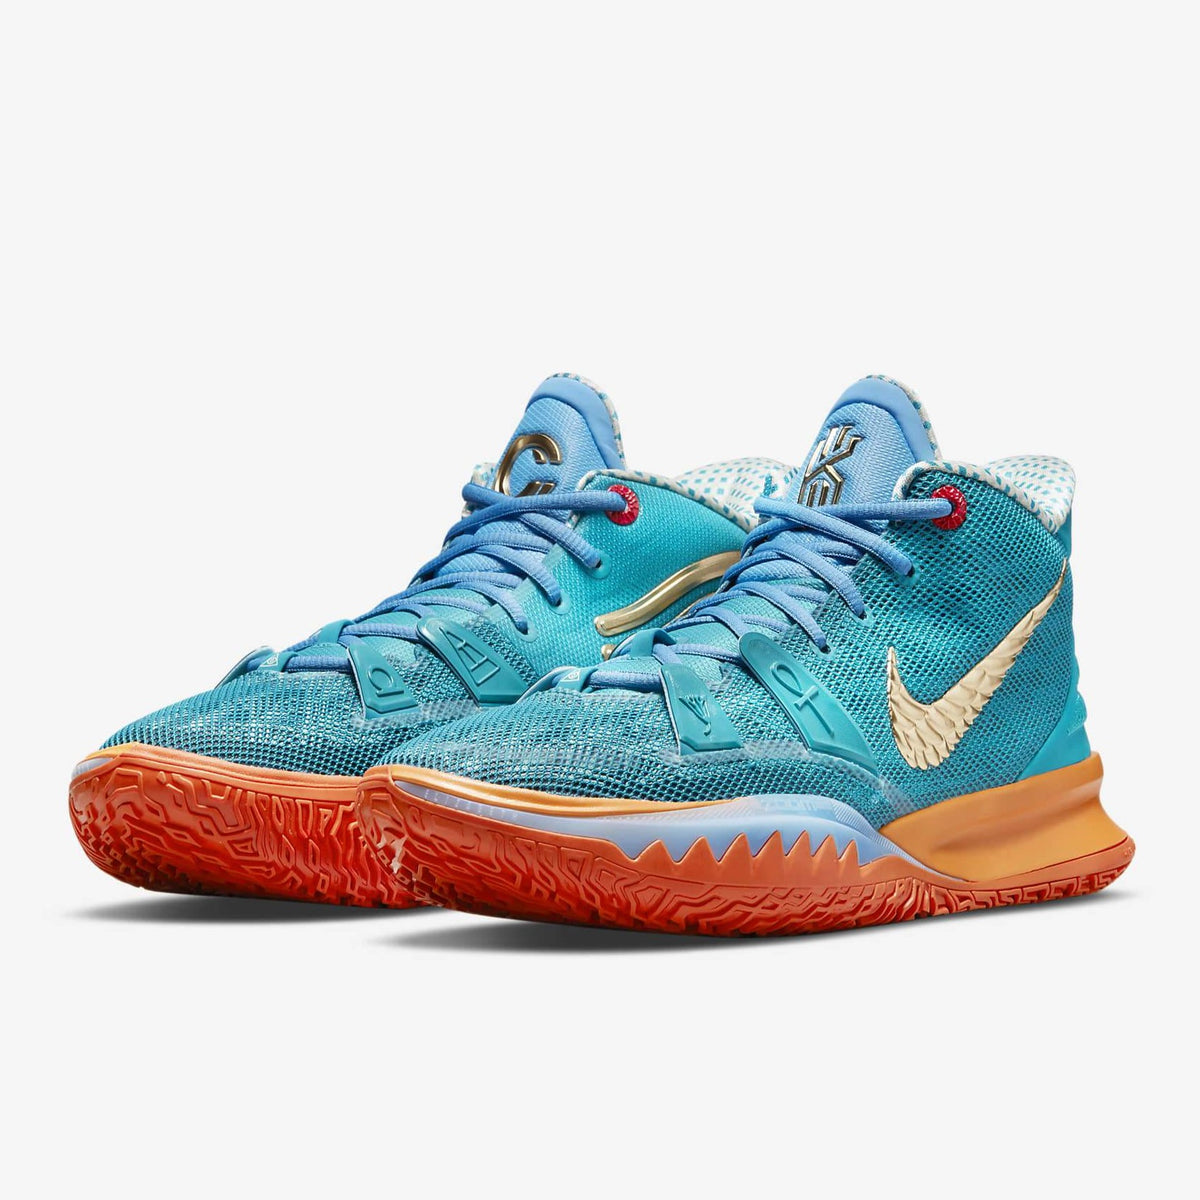 Nike Kyrie 7 EP x Concepts 